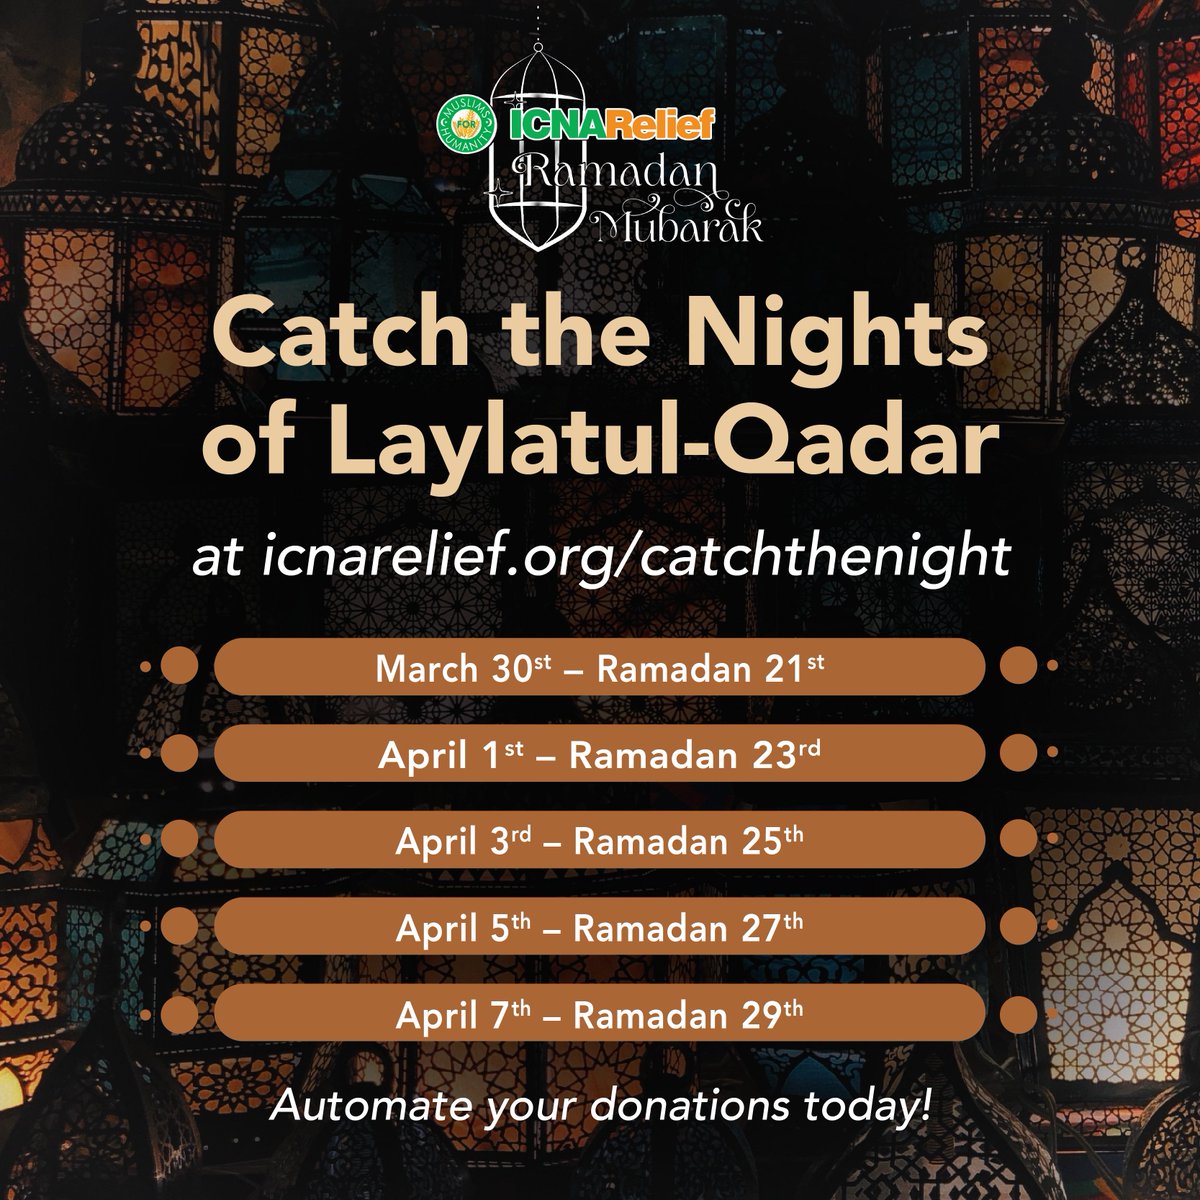 This Ramadan, you can schedule your donations for the last 10 nights of Ramadan, ensuring you automatically contribute on the nights of Laylatul Qadr. Catch the night and automate your donations at icnarelief.org/catchthenight